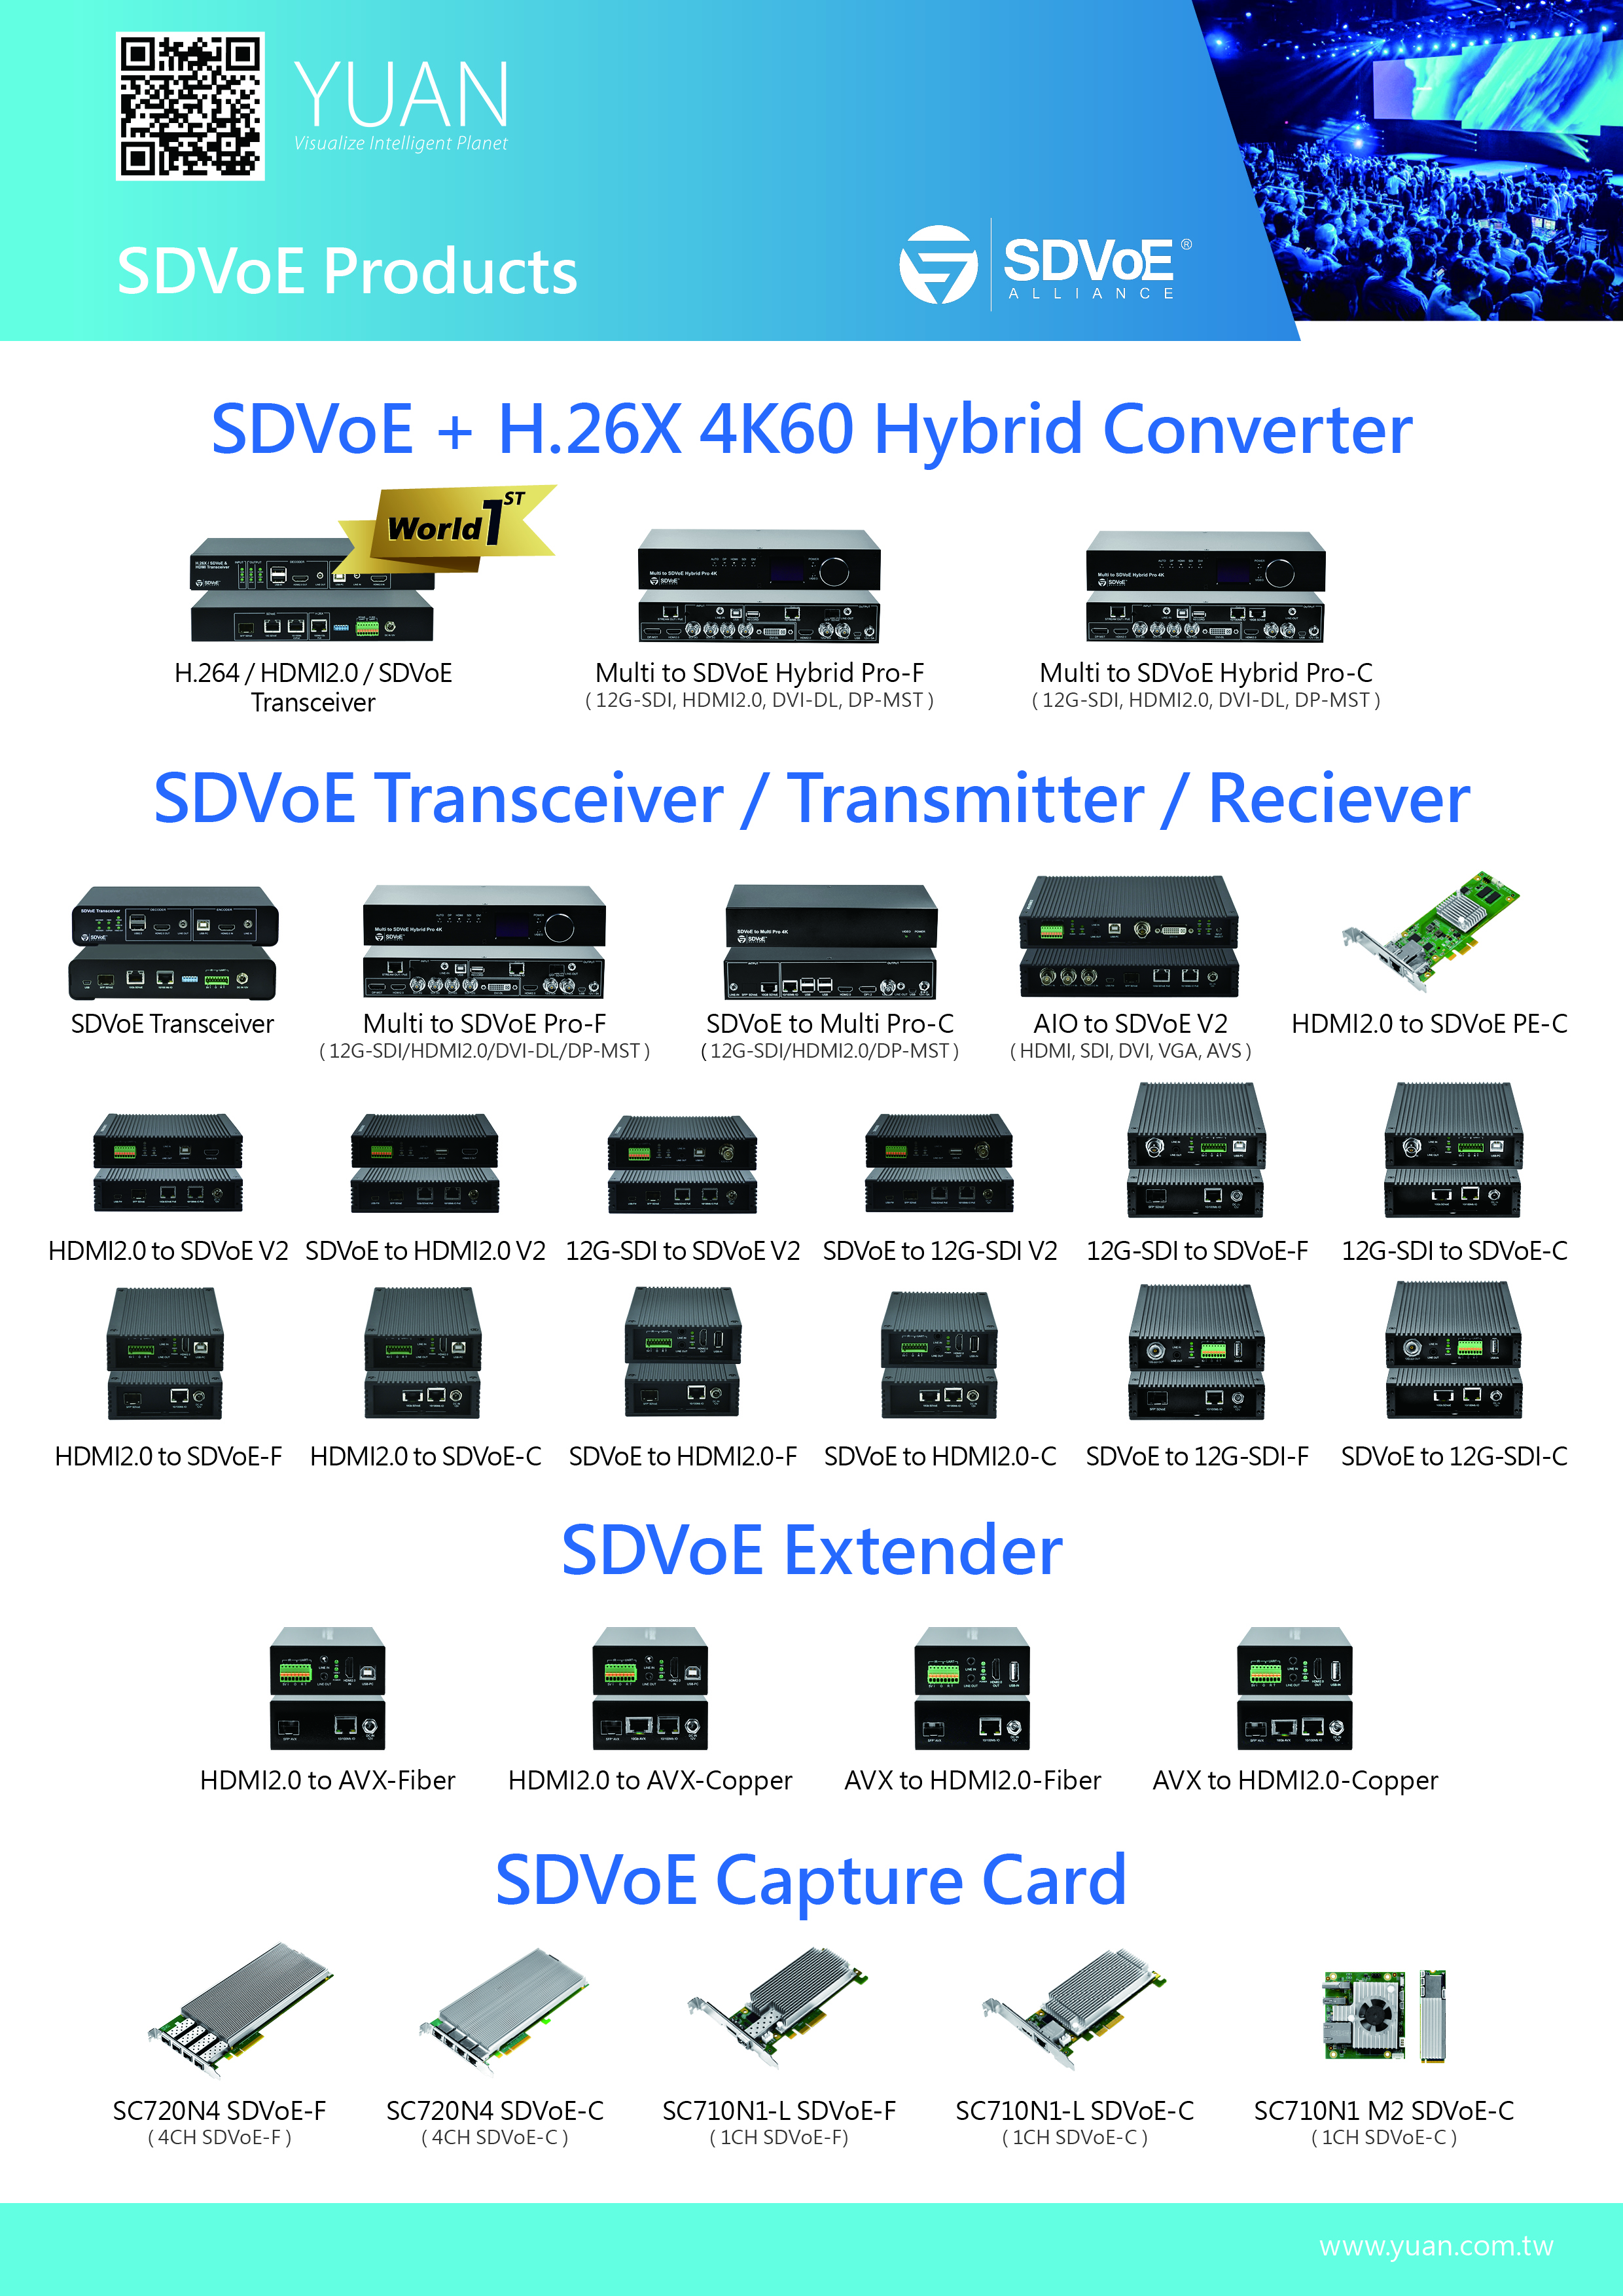 SDVoE Products